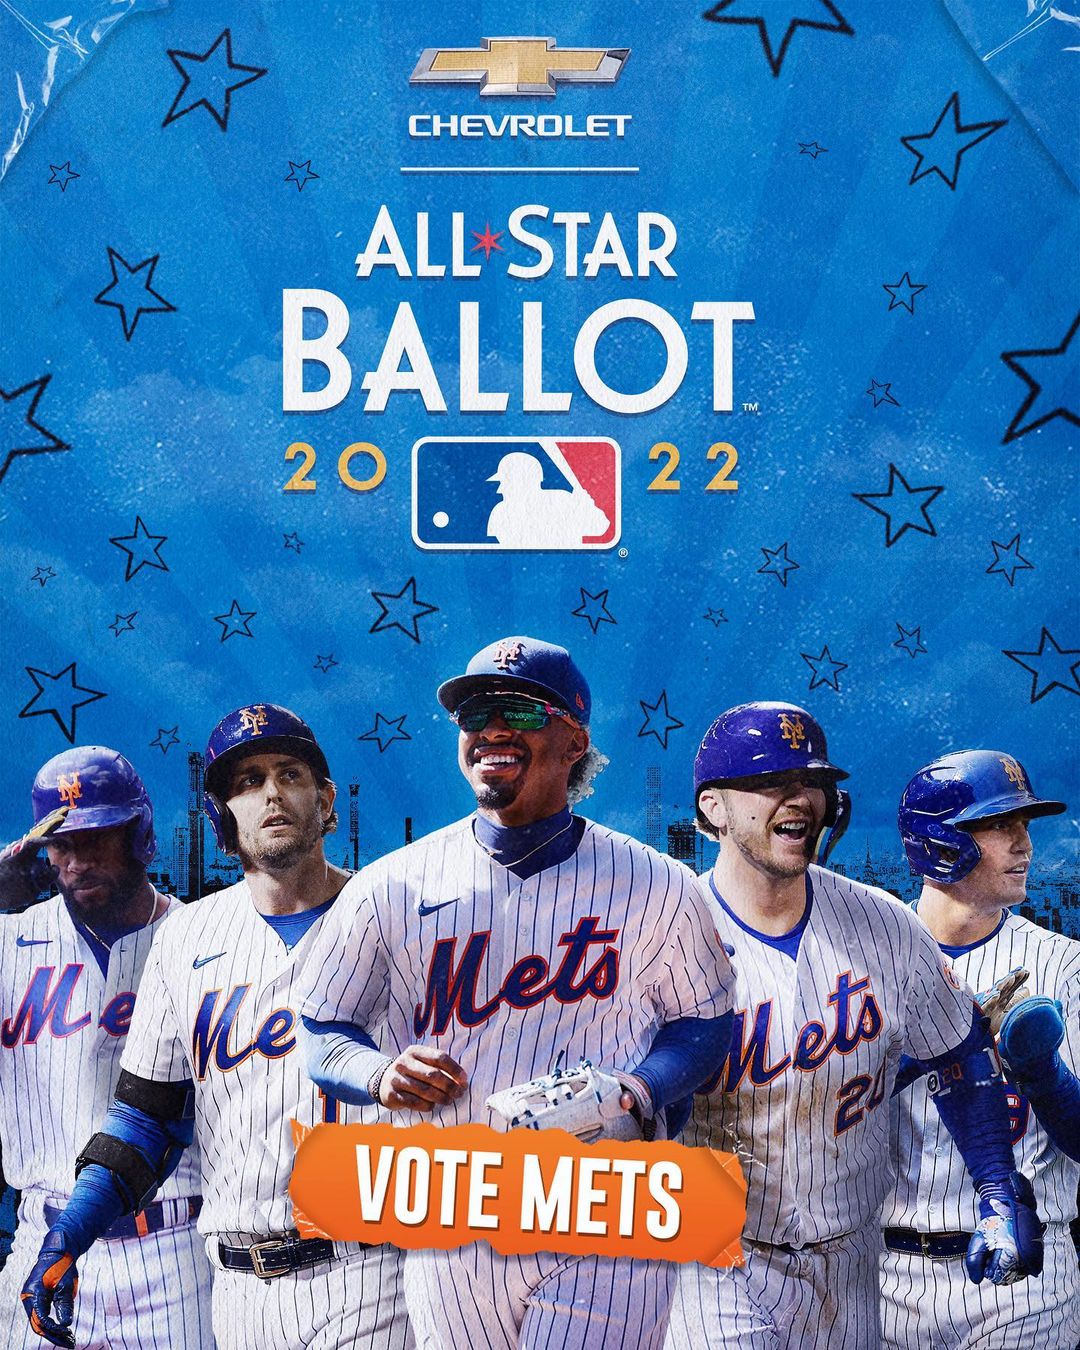 The All-Star Ballot is now OPEN! #VoteMets to send us to LA....